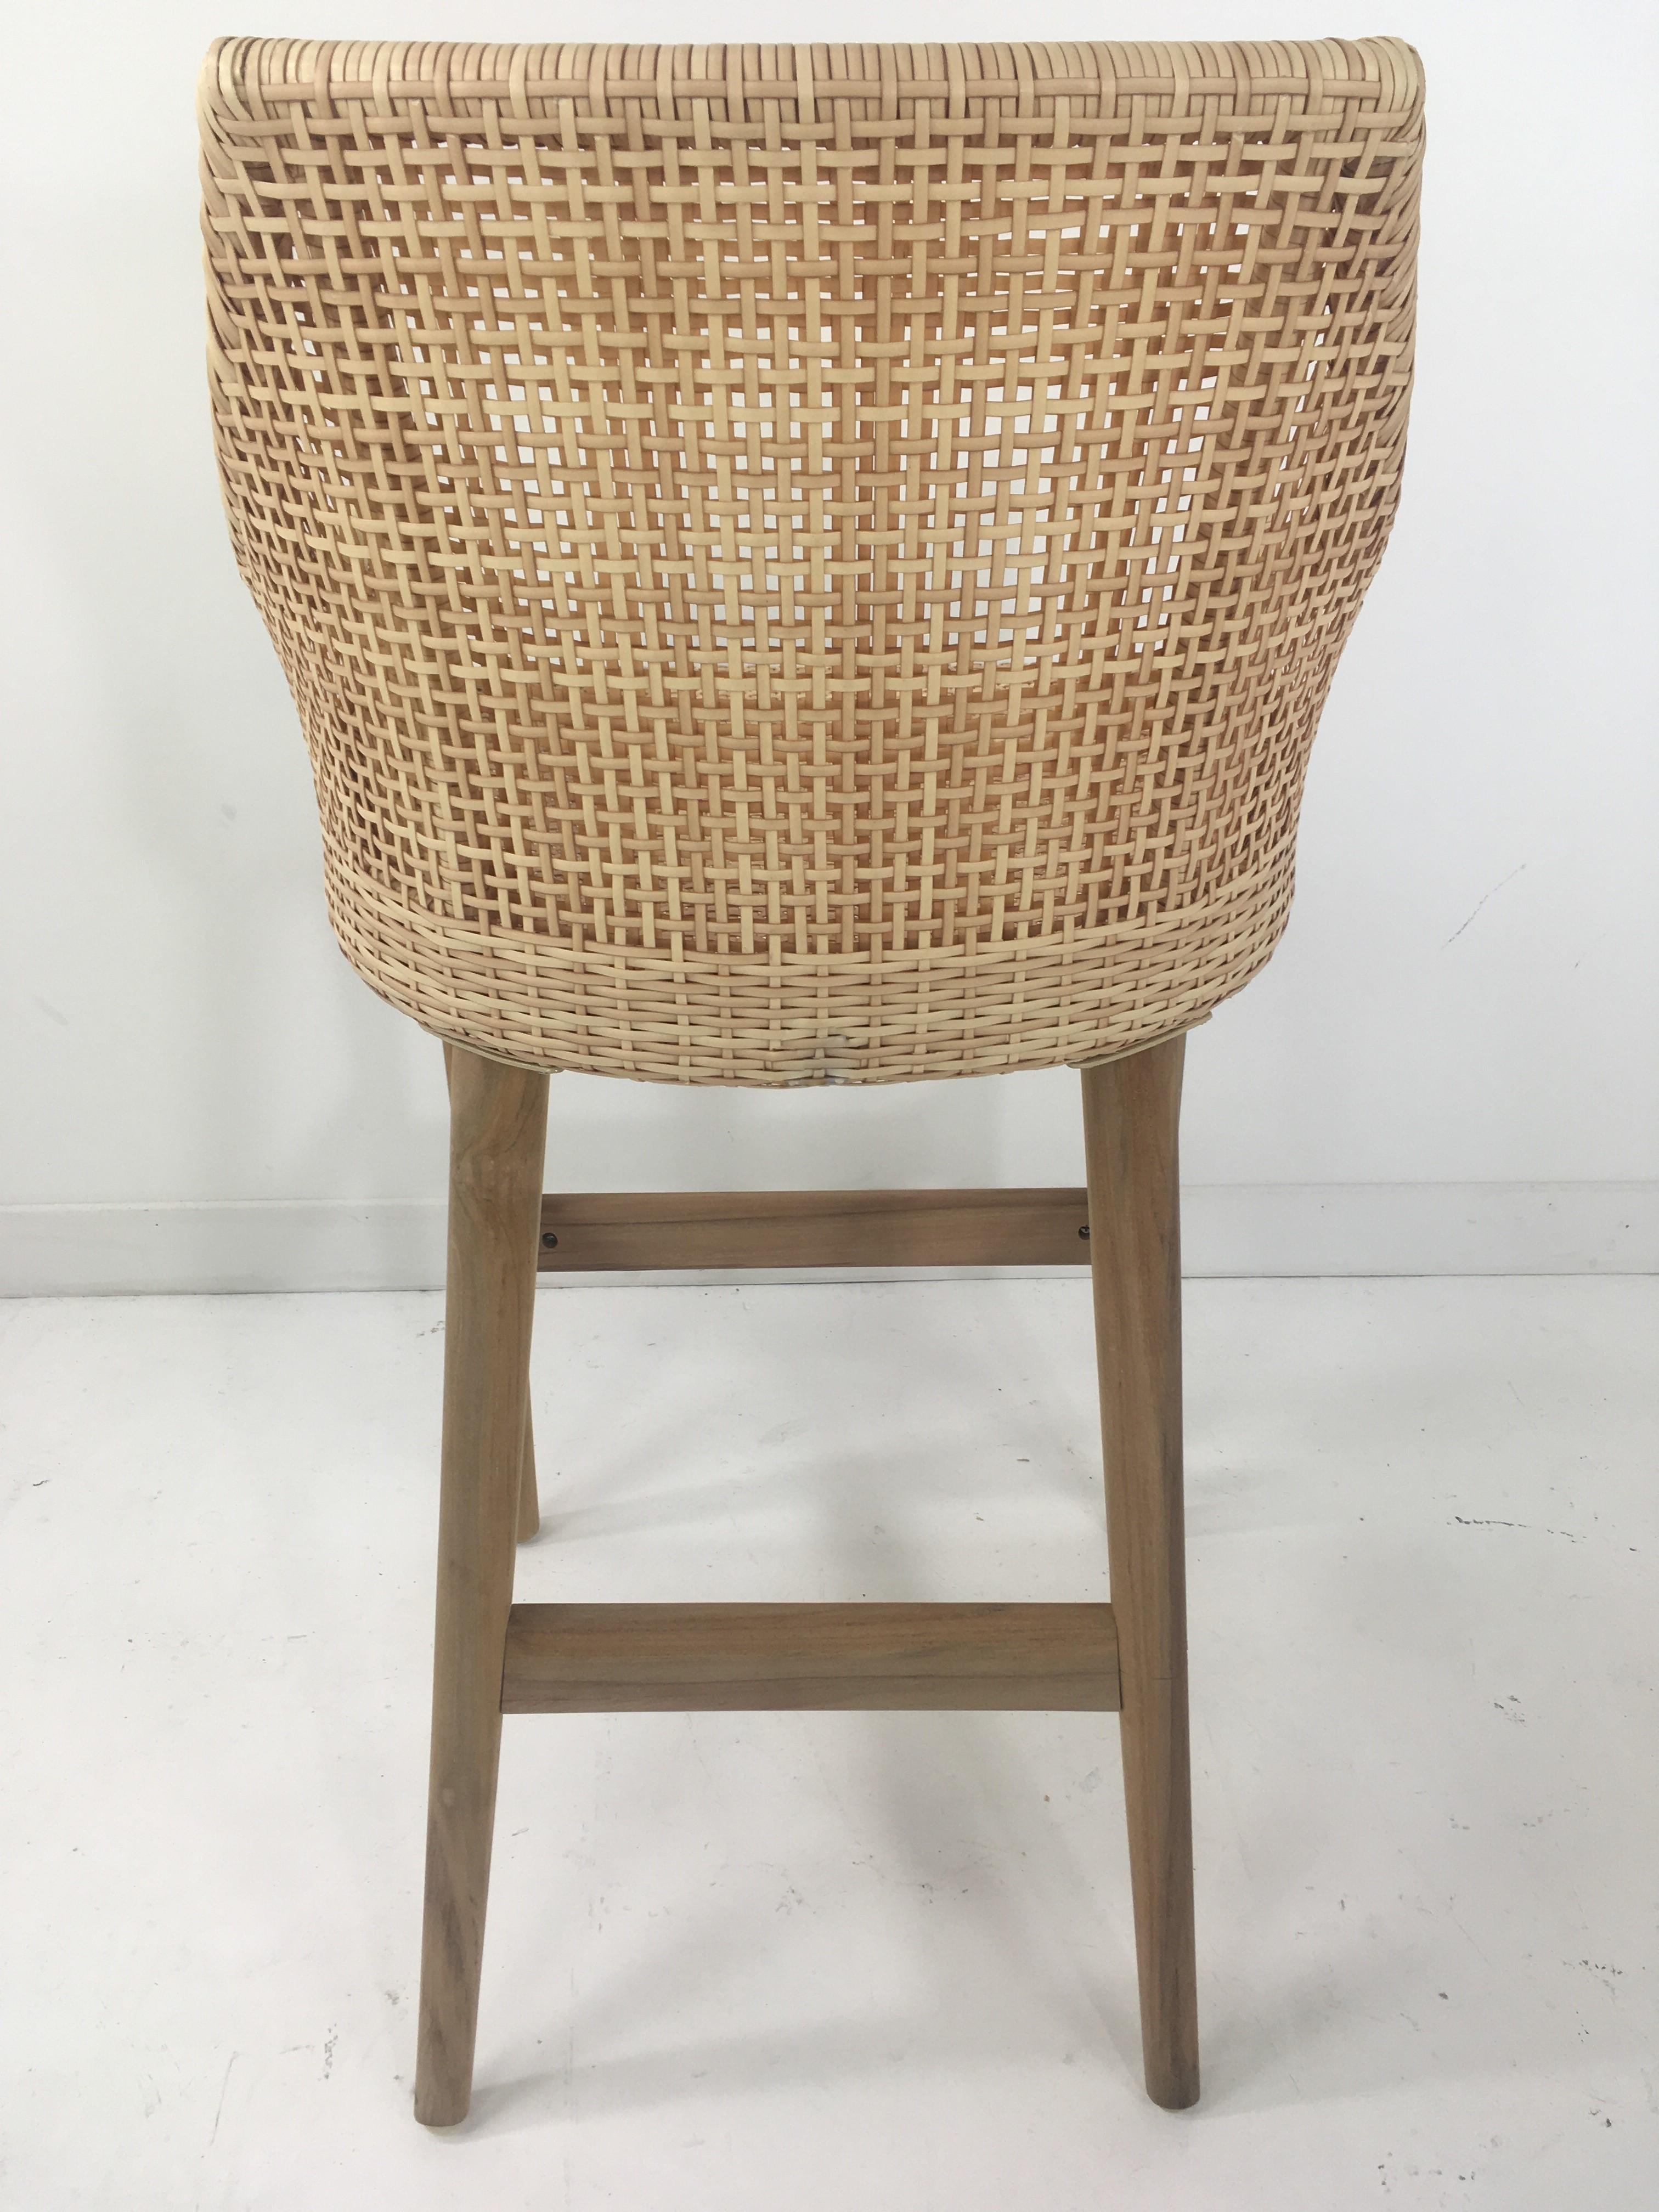 Teak Wooden and Braided Resin Rattan Effect Outdoor Bar Stool For Sale 4